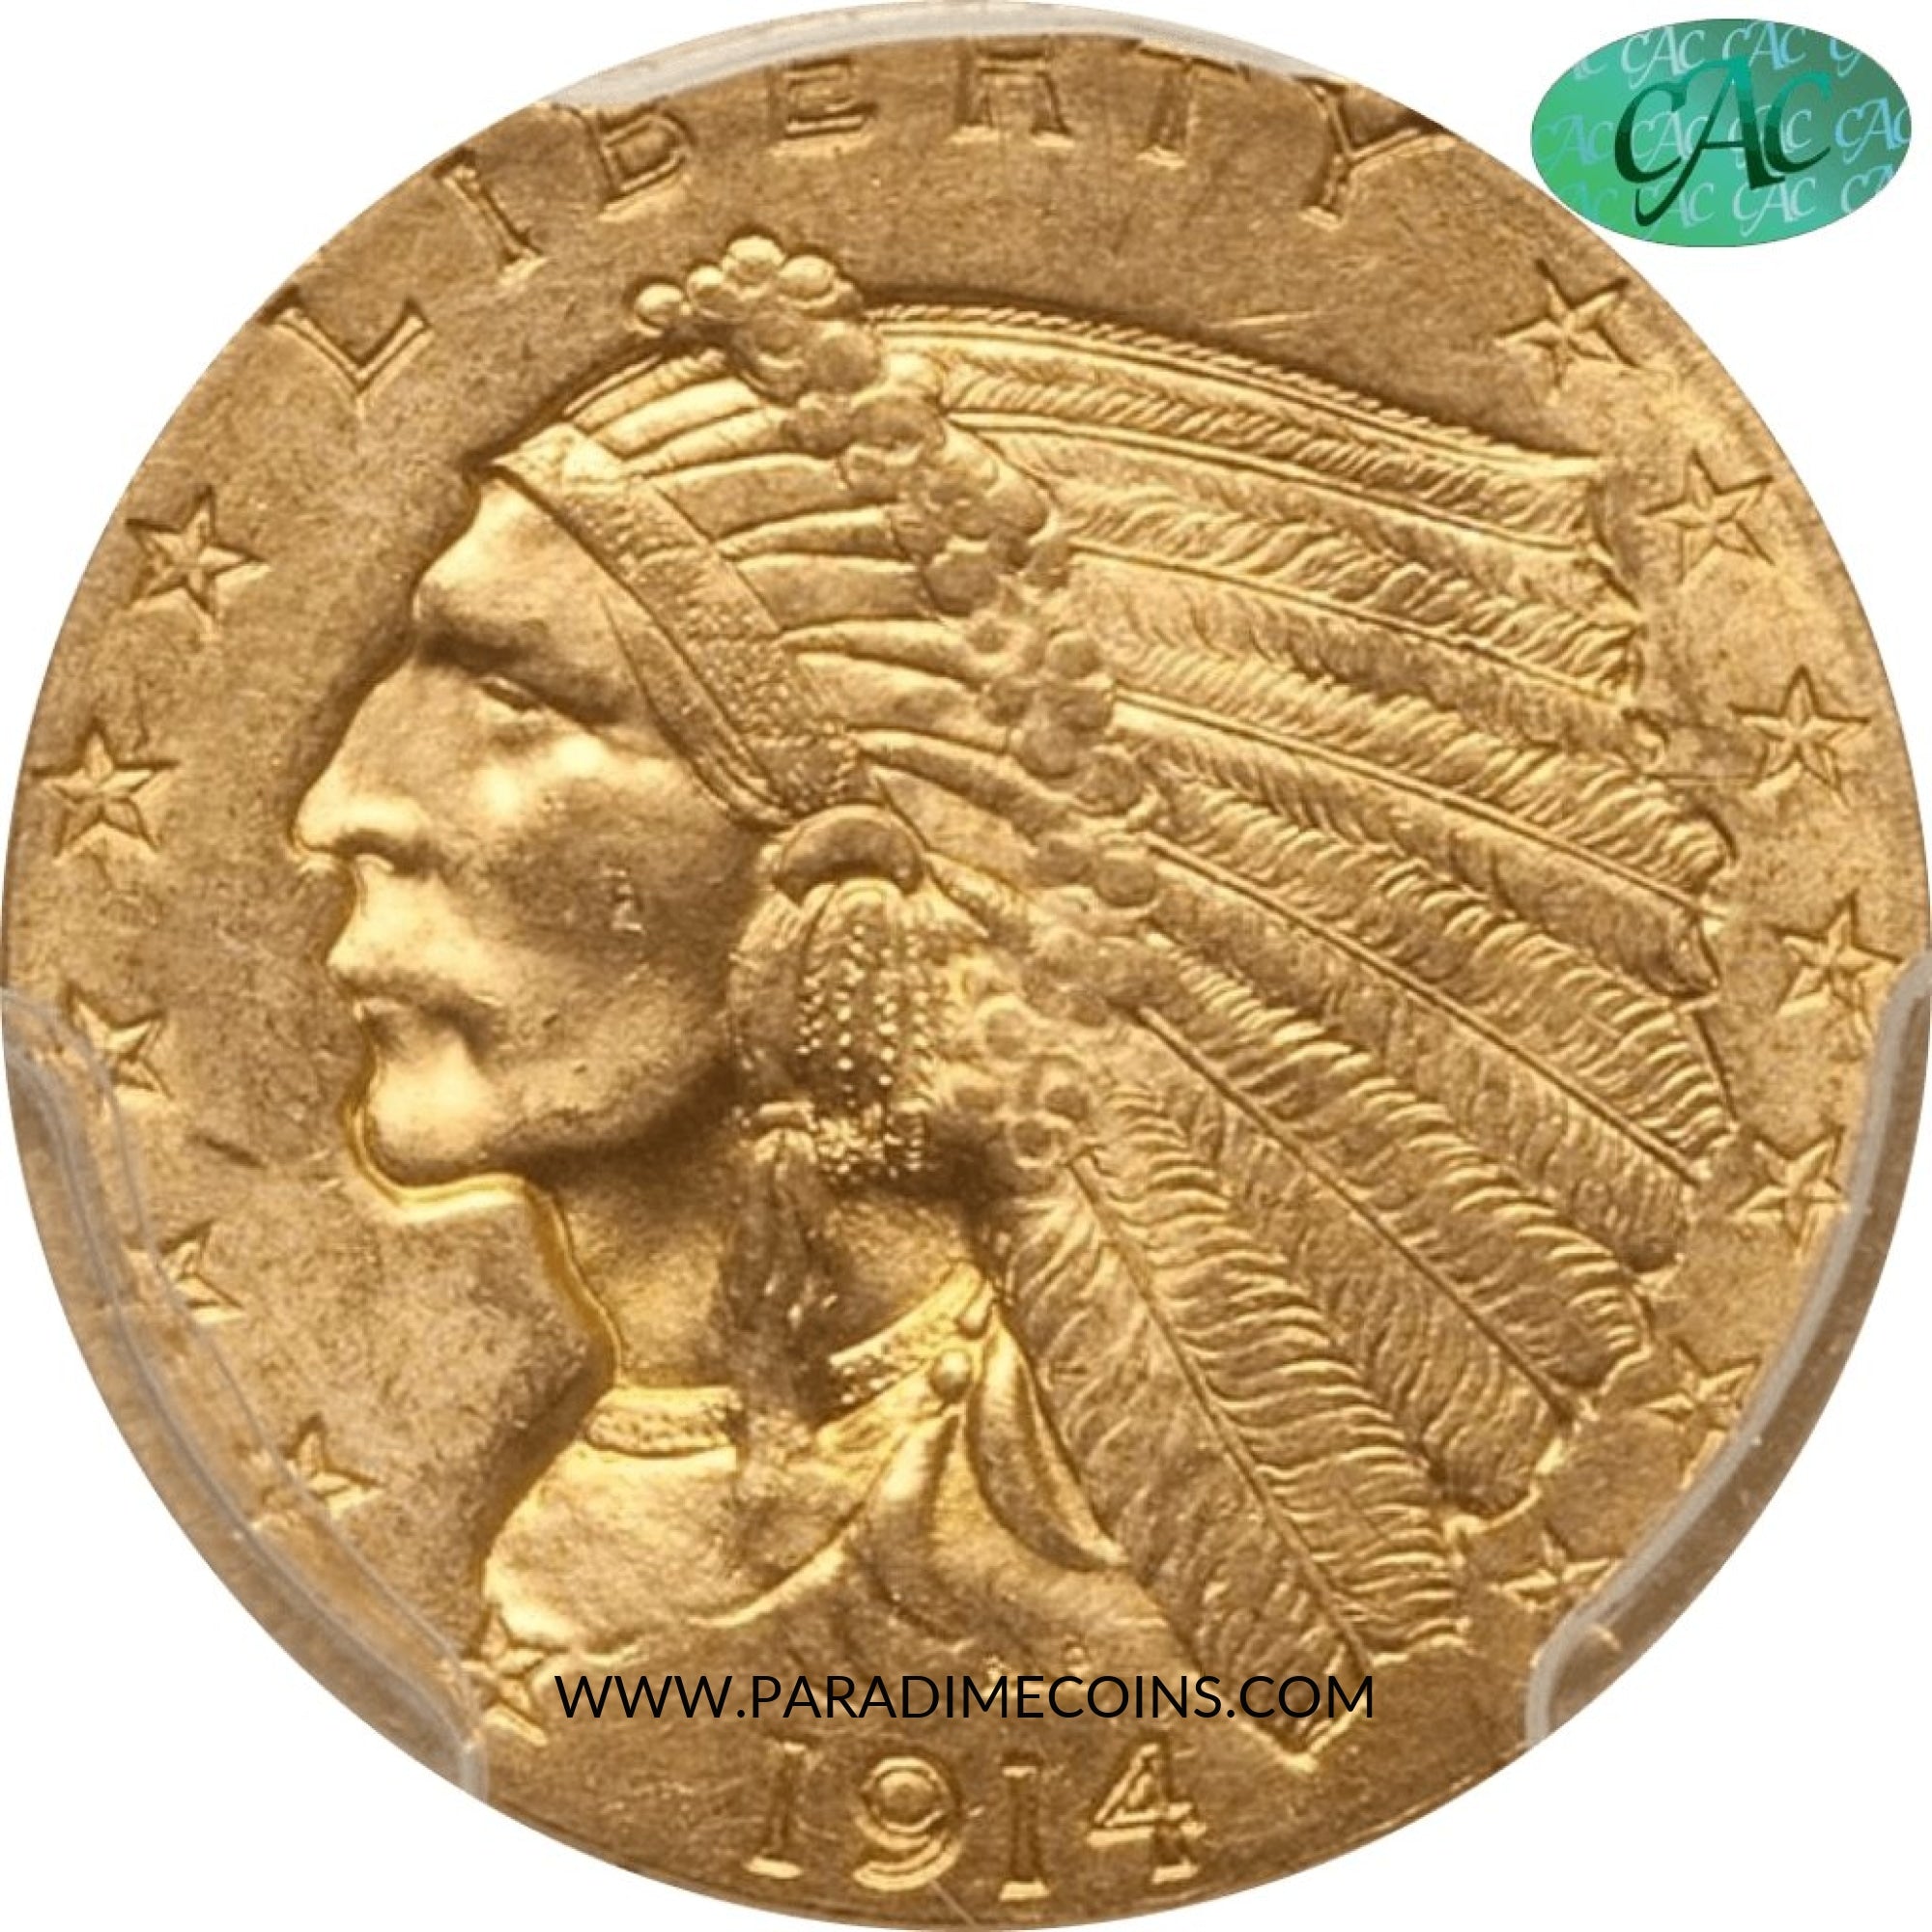 1914 $2.5 MS64 PCGS CAC - Paradime Coins | PCGS NGC CACG CAC Rare US Numismatic Coins For Sale